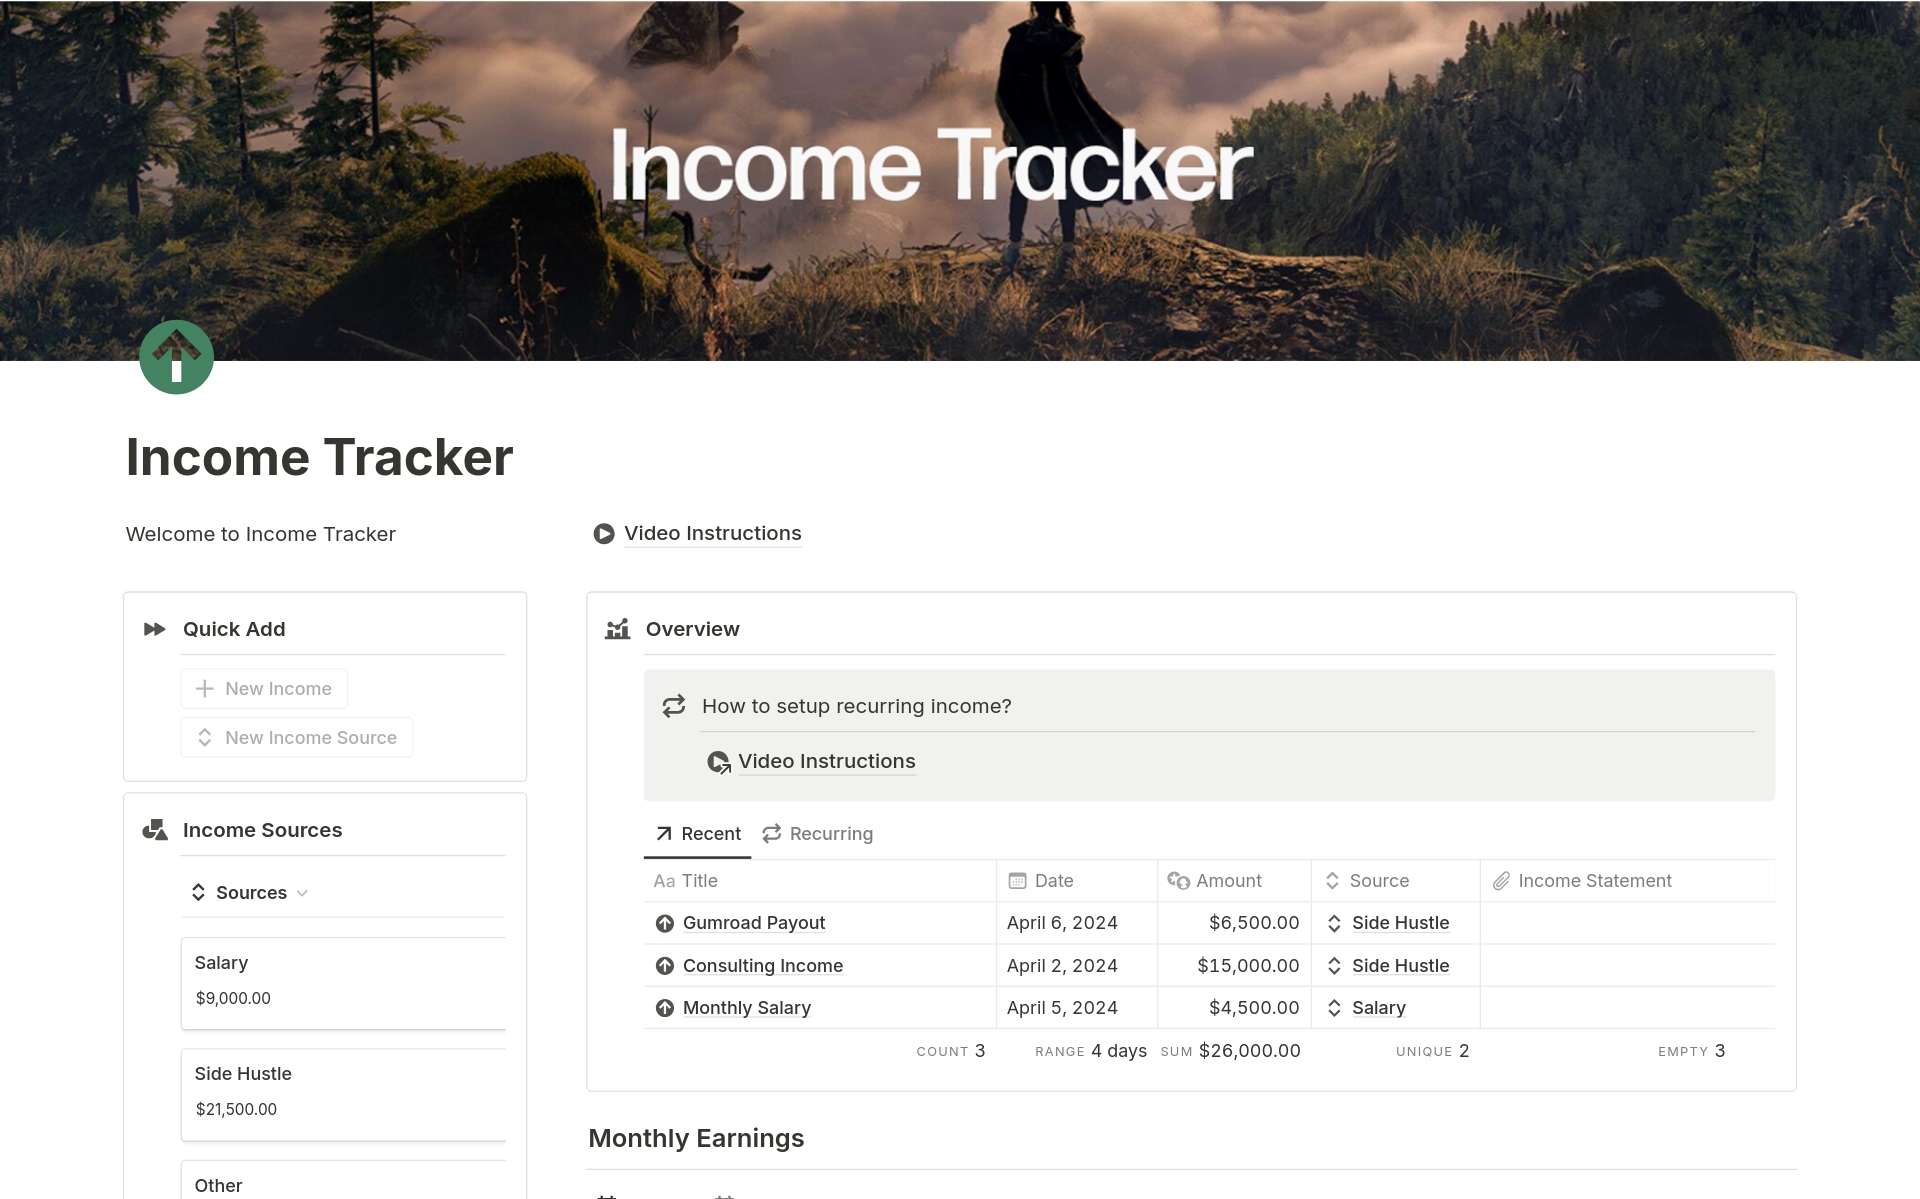 Keep track of your income, track by sources, monthly summaries. Simple and Straight Forward!